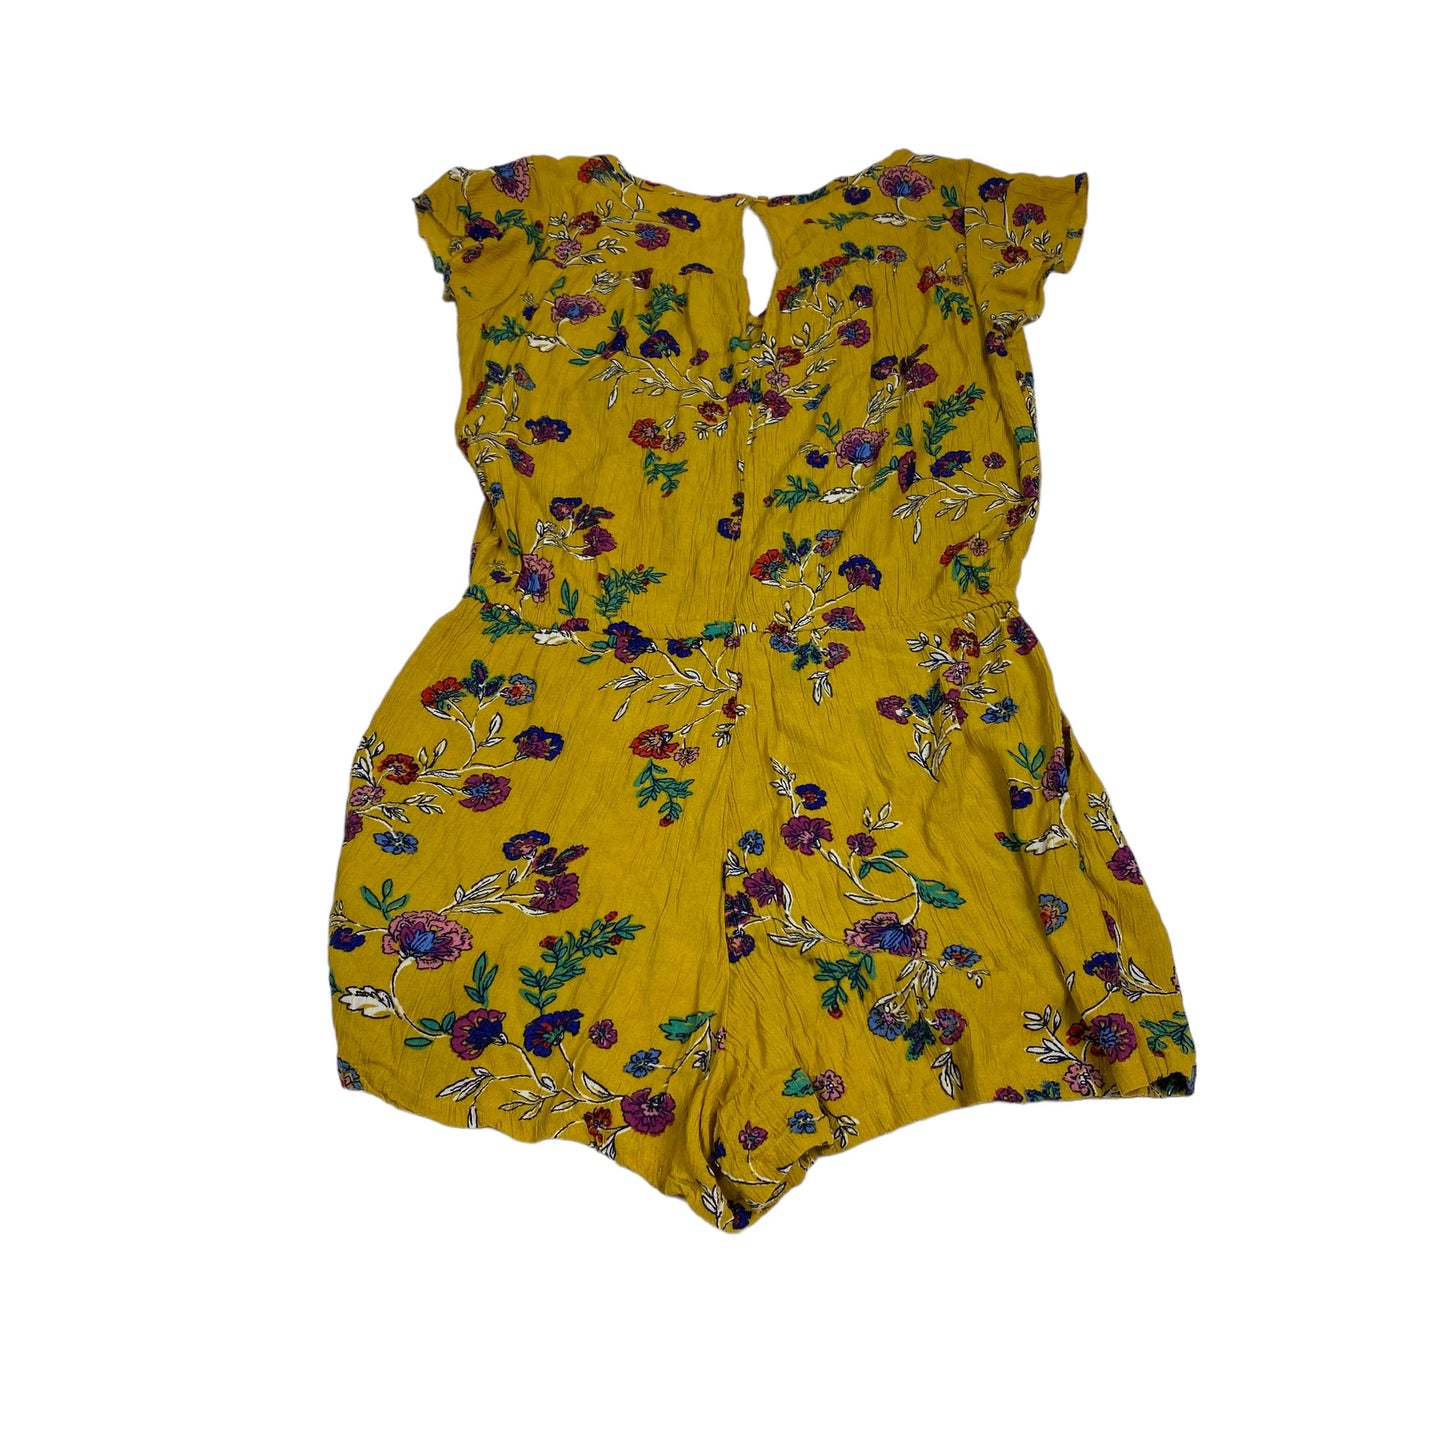 Romper By Old Navy  Size: S